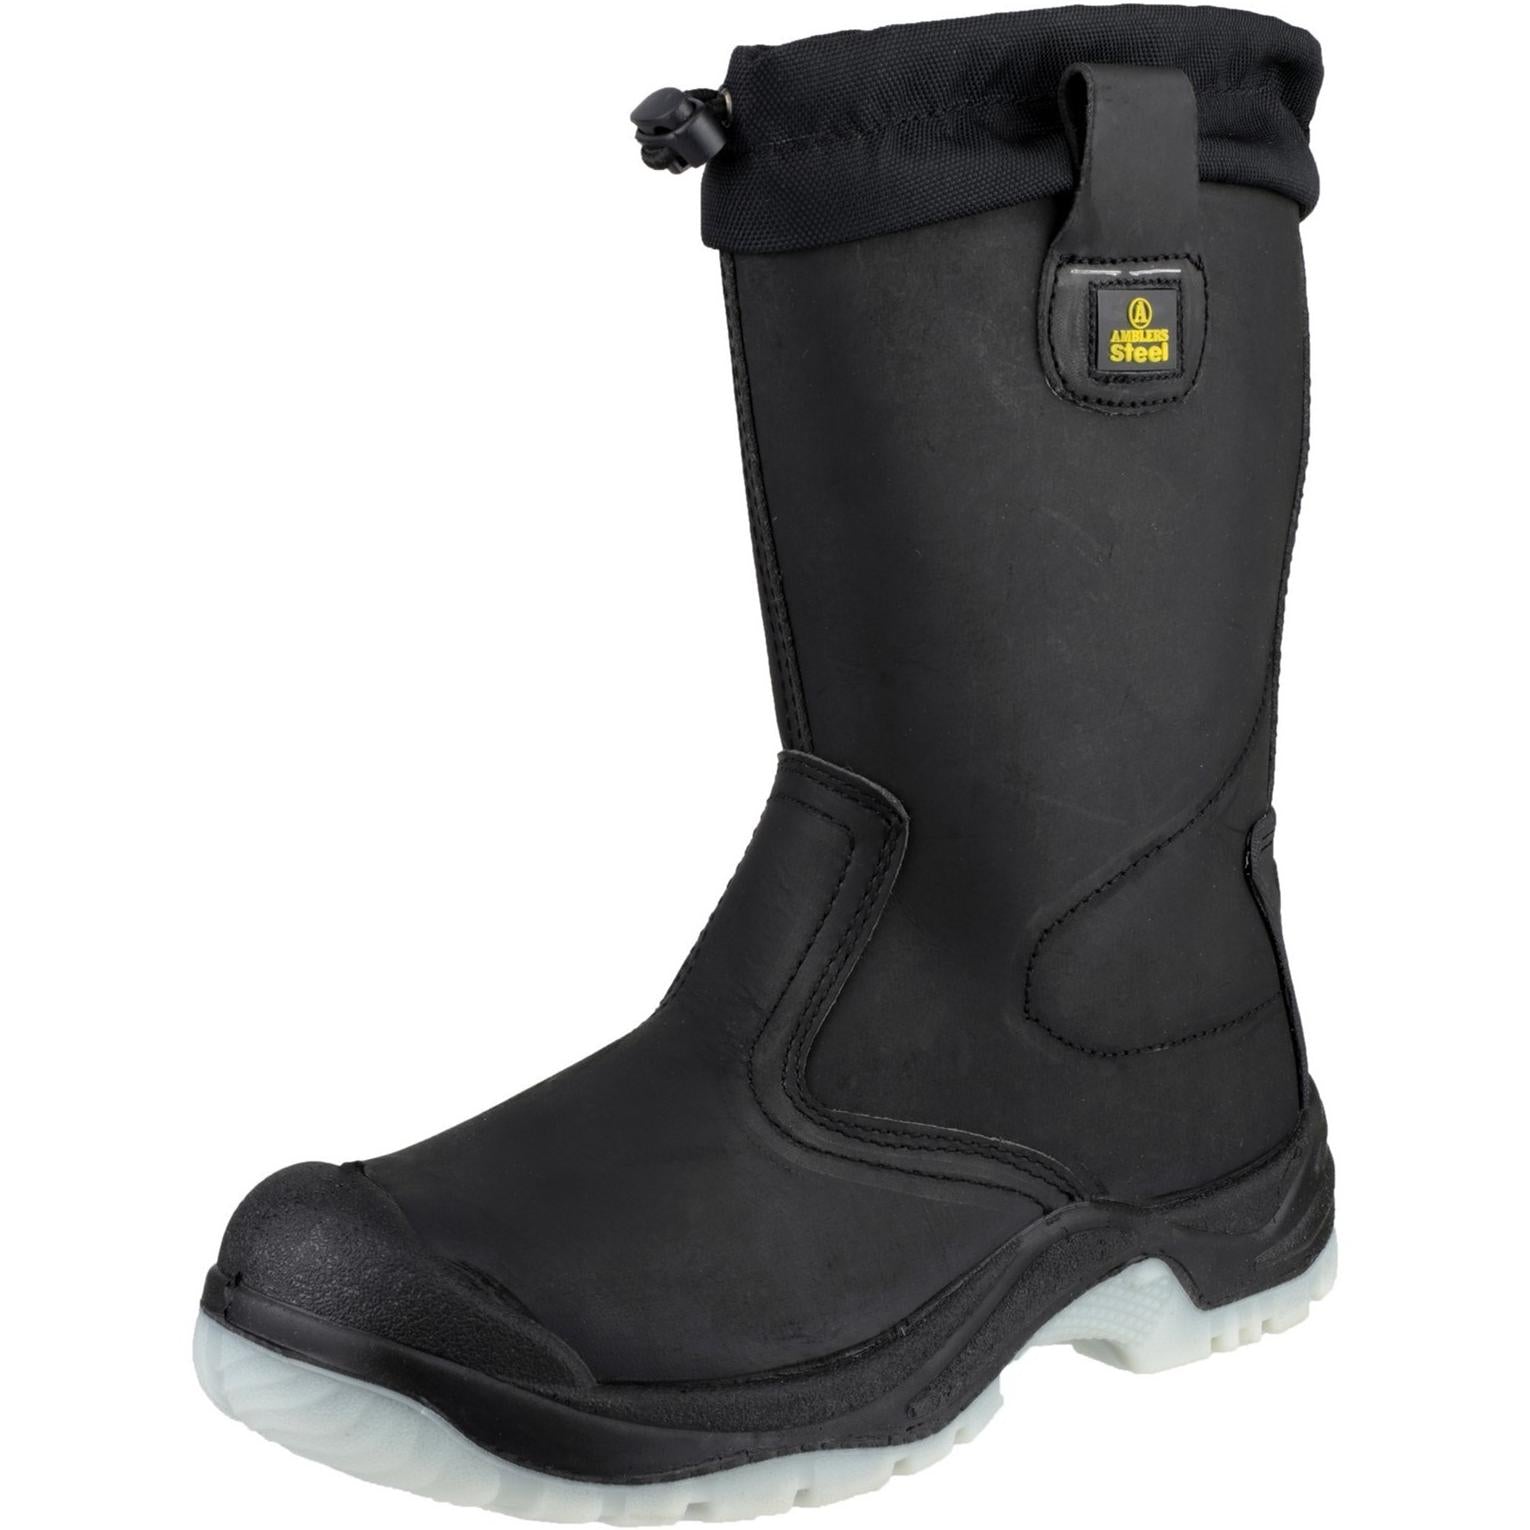 Amblers Safety FS209 Water Resistant Pull On Safety Rigger Boot